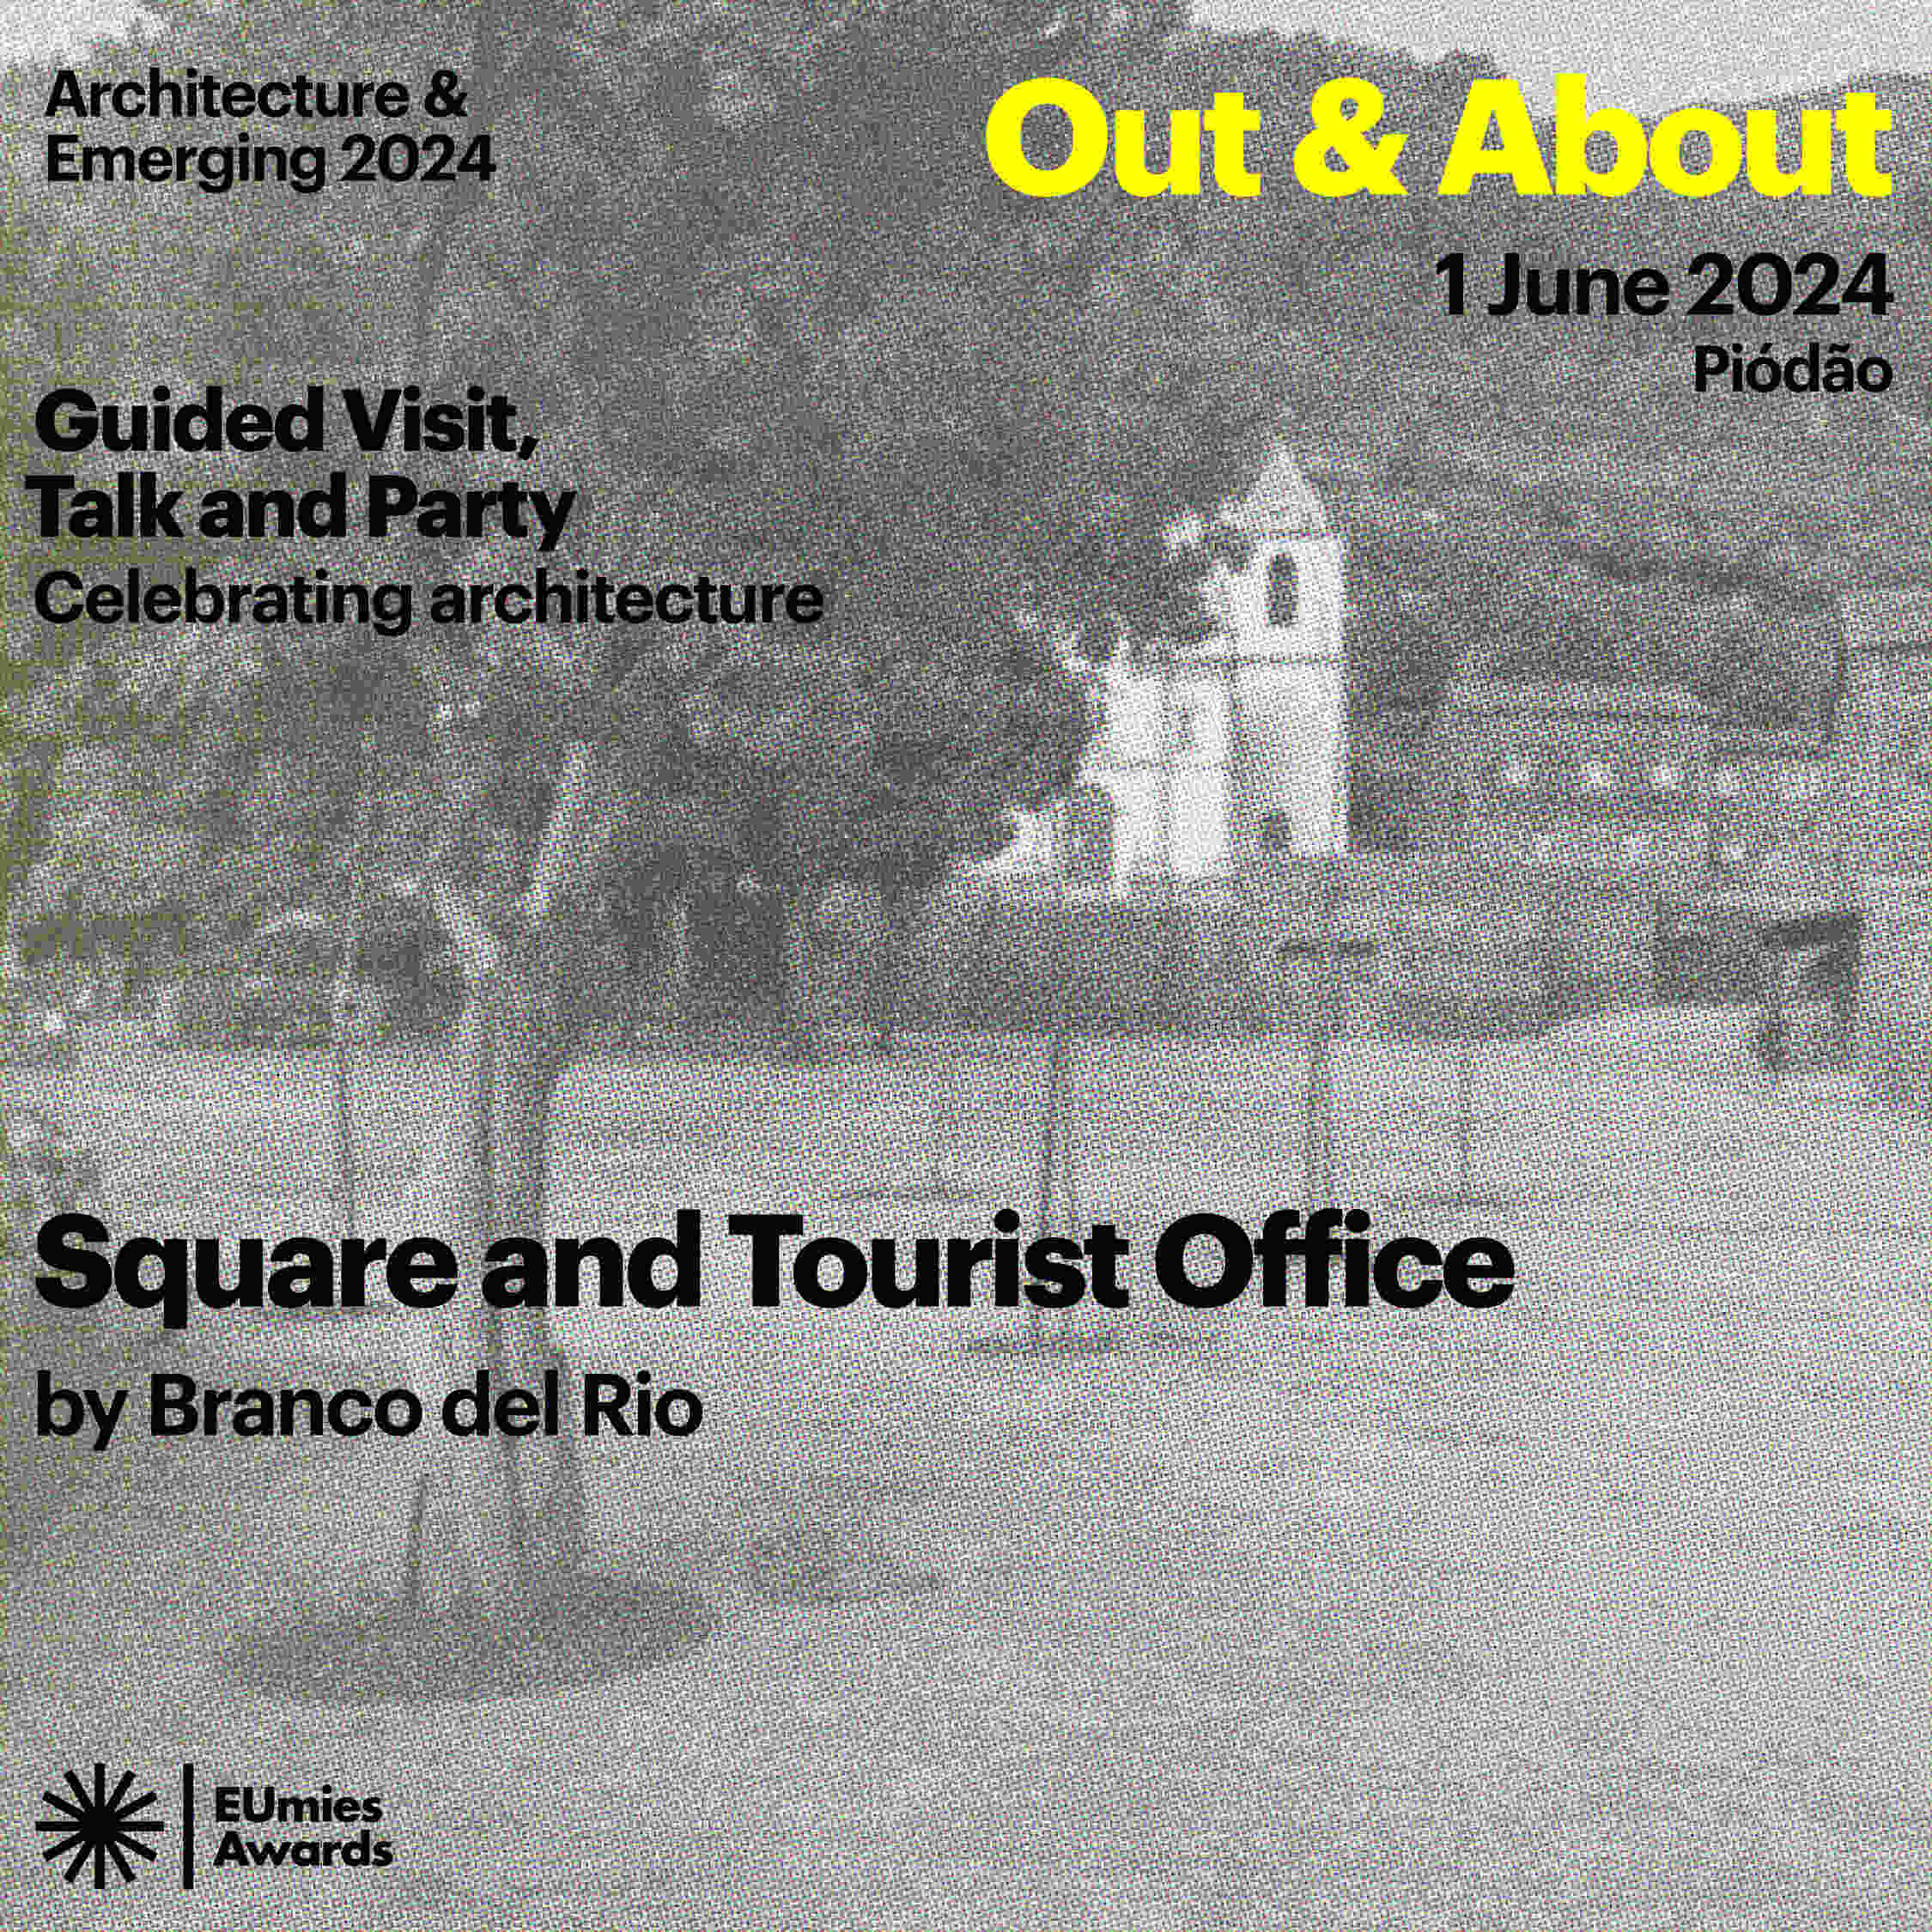 Out & About: Square and Tourist Office